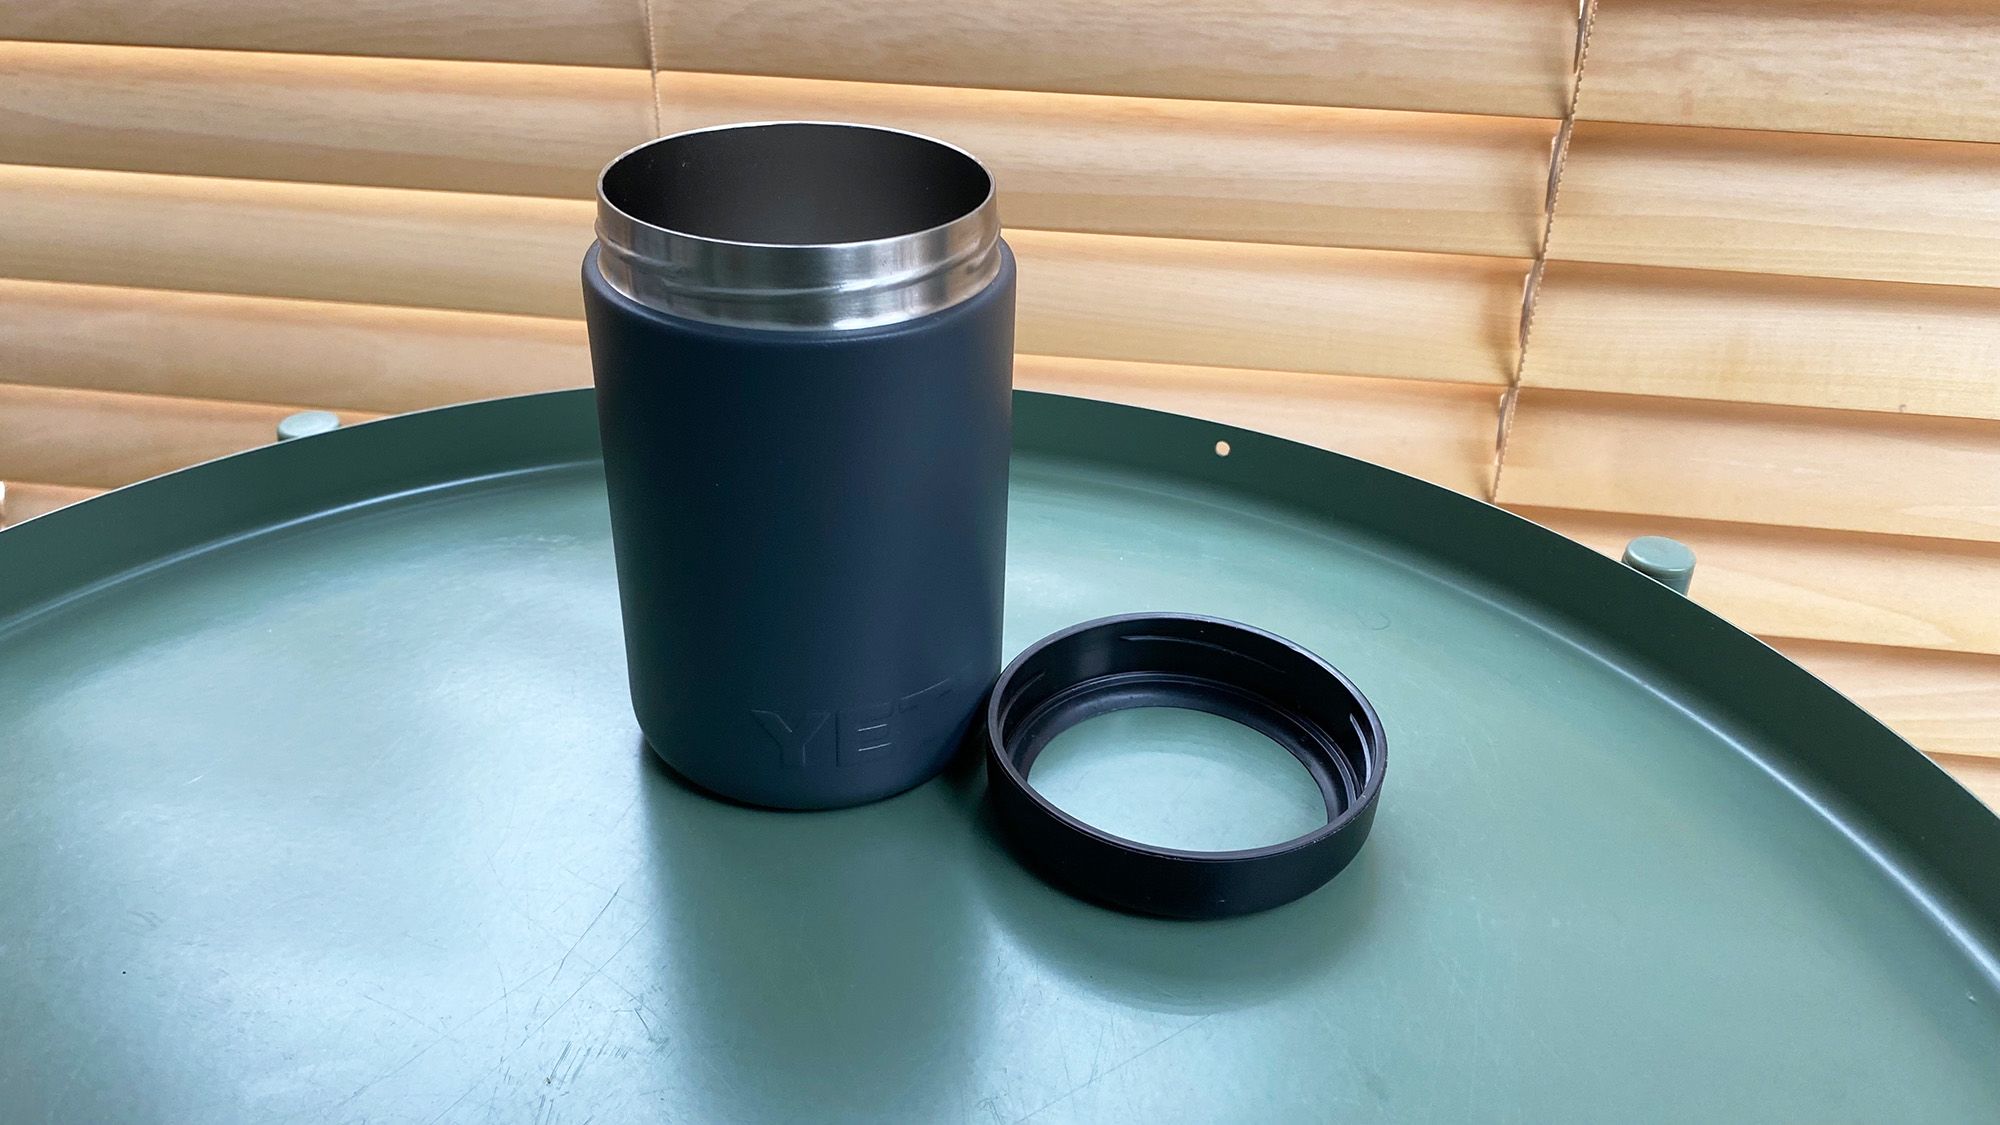 Review: Yeti 16 oz. Colster Can Insulator 